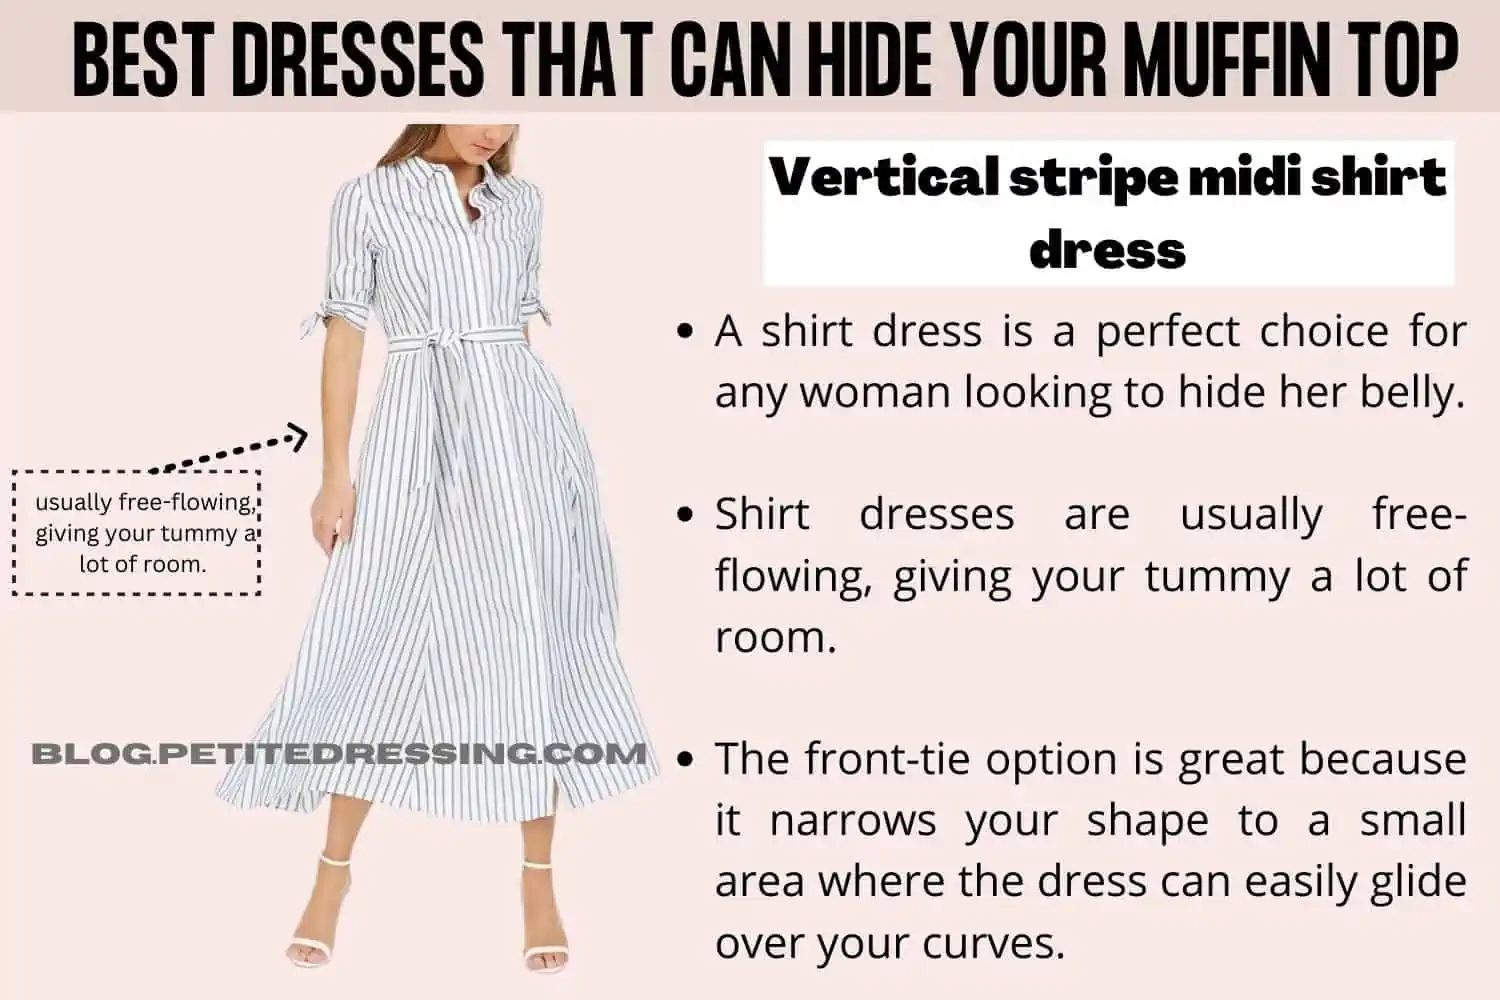 What style tops look good on women with a muffin top - Petite Dressing